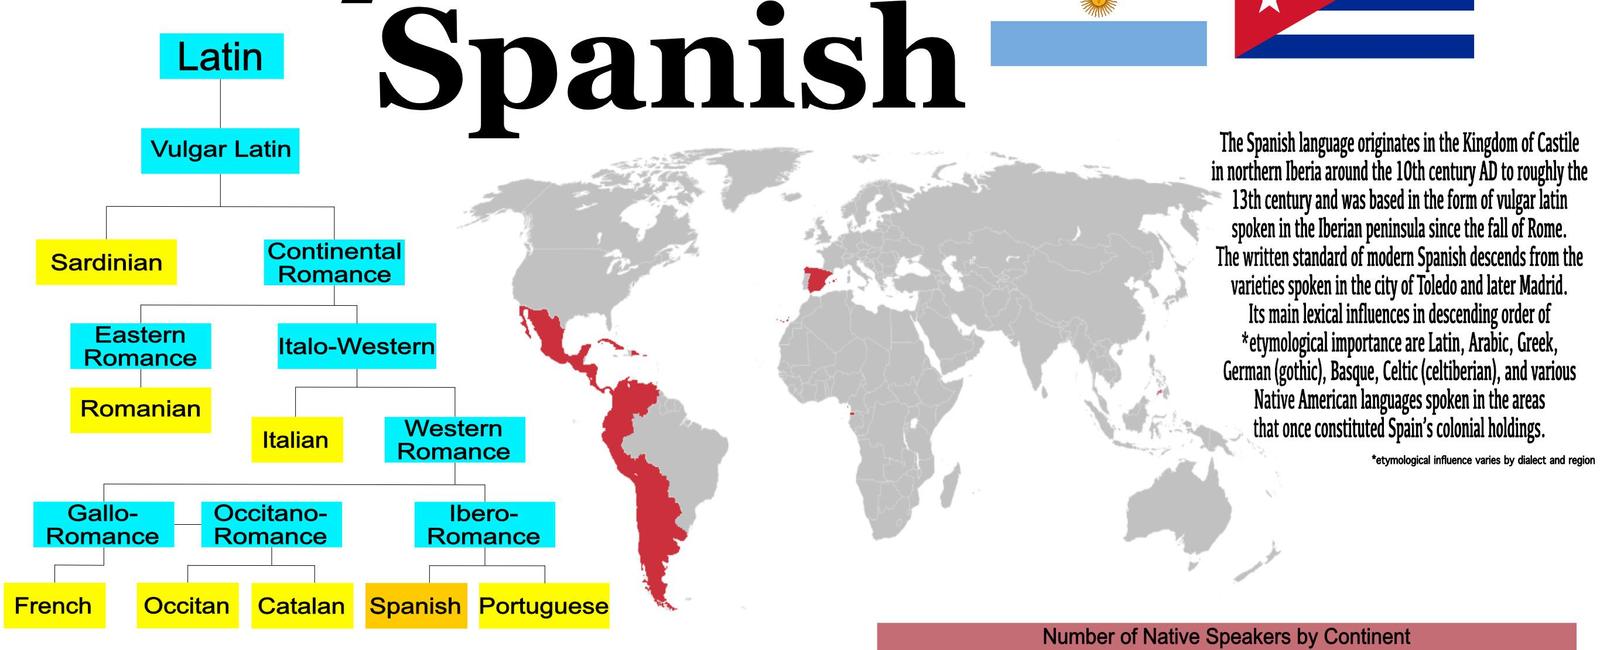 Spanish is the second most spoken language in the world